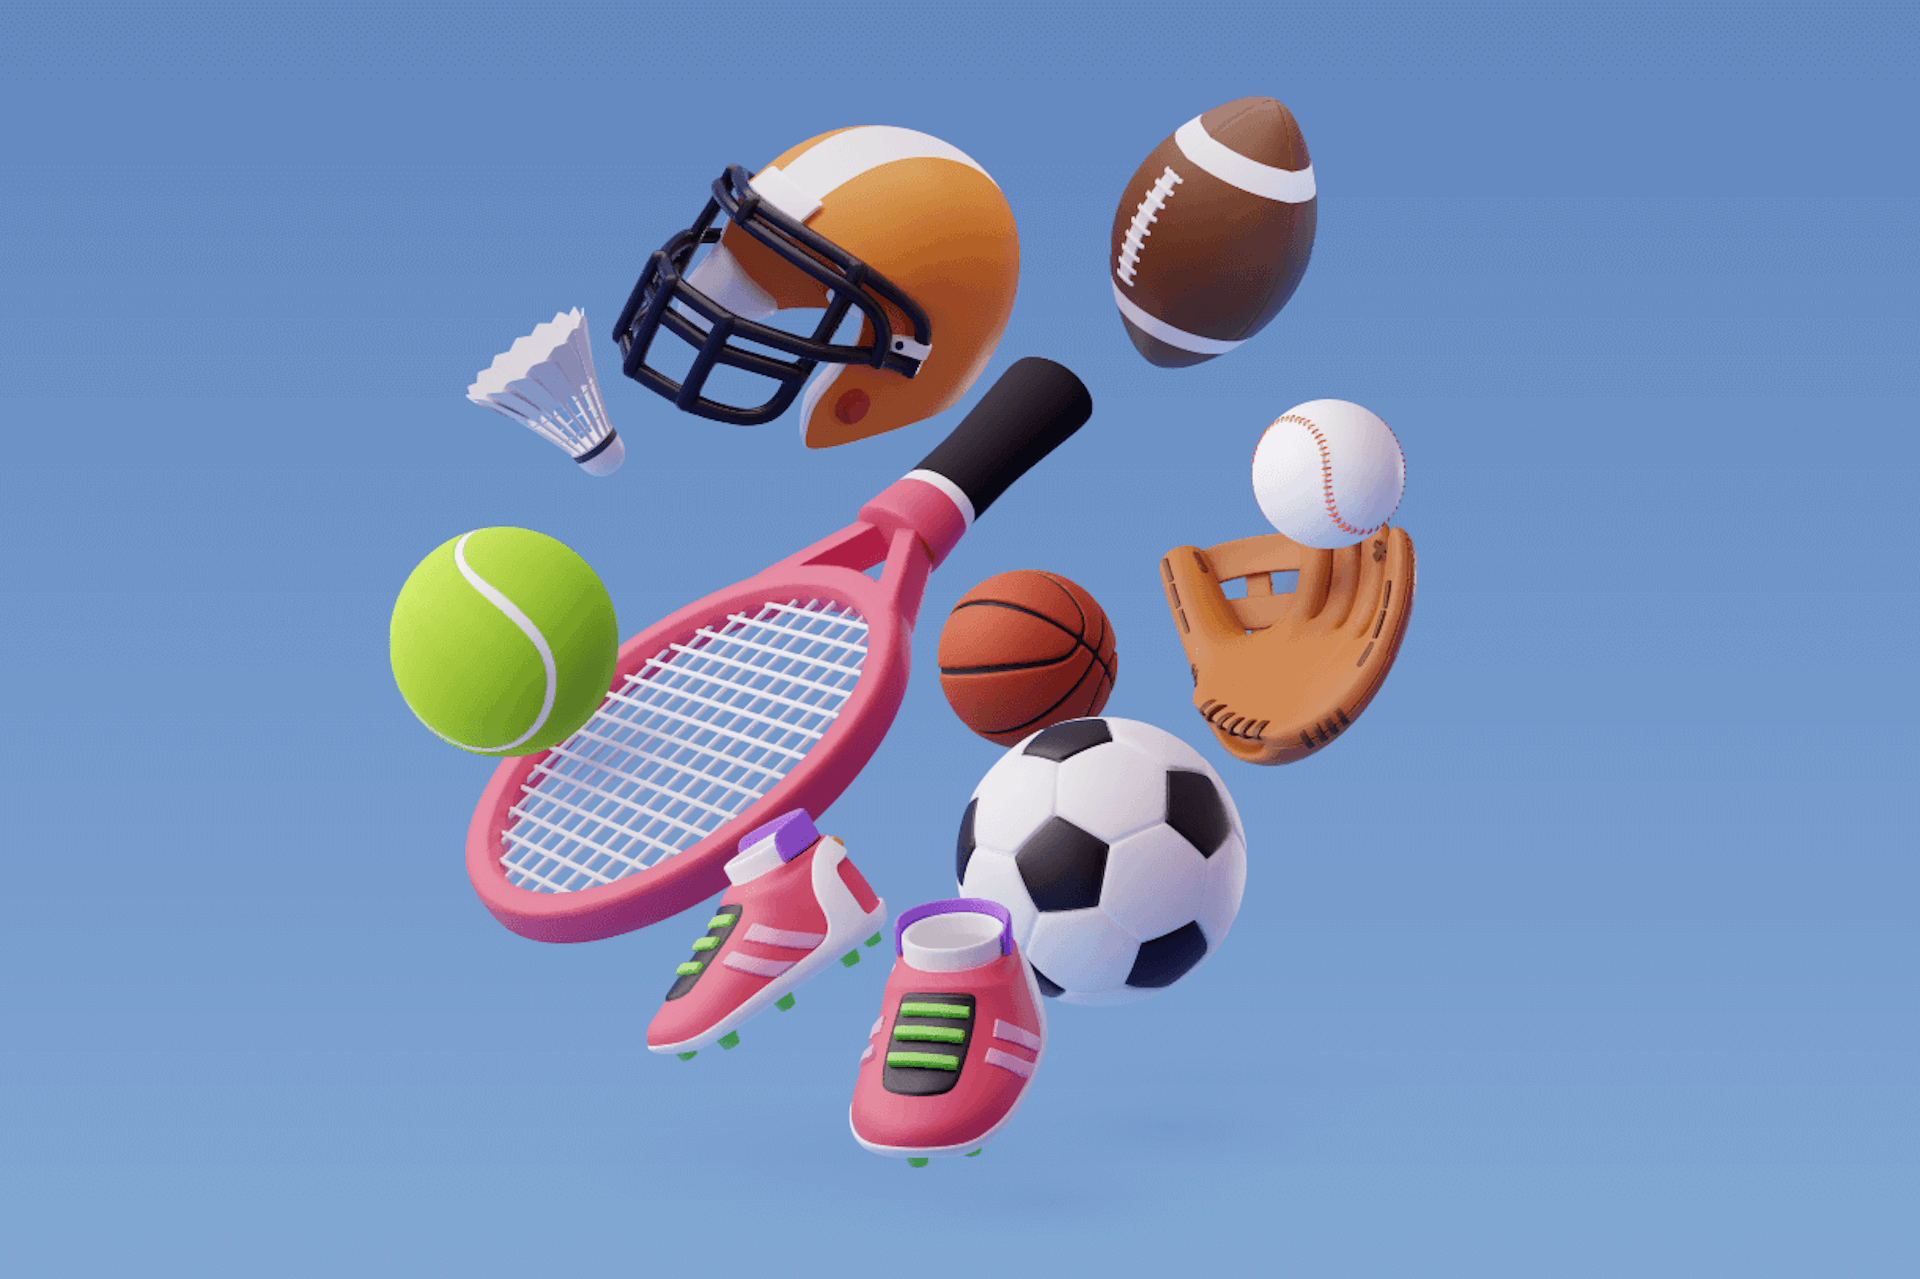 Image of various sports equipment floating in the air including a tennis racket, soccer ball, tennis ball, baseball, basketball, baseball glove, cleats, football, and football helmet. Top Sports and Fitness influencers blog post.  